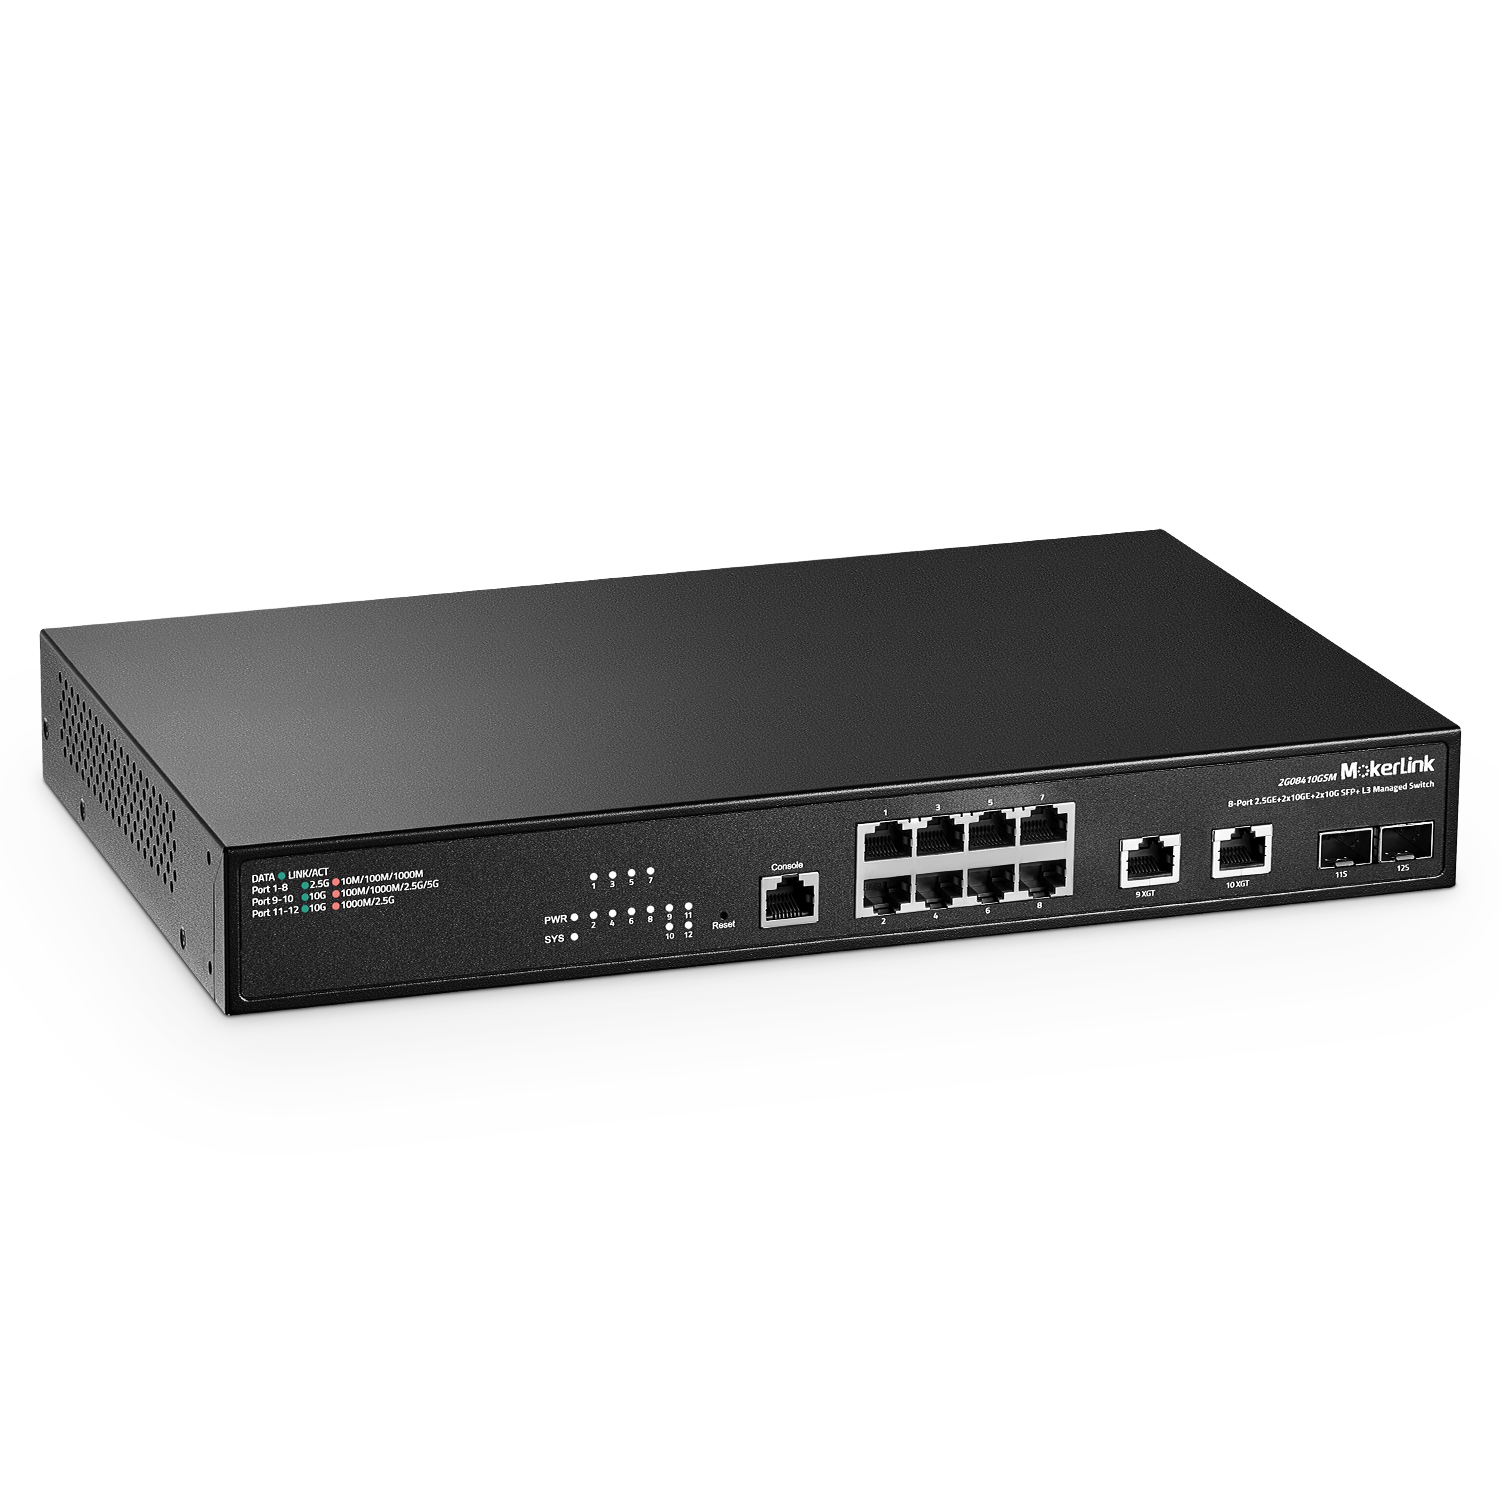 MokerLink Store - 8-Port*2.5G+2*10GE+2*10G SFP+ Managed Switch